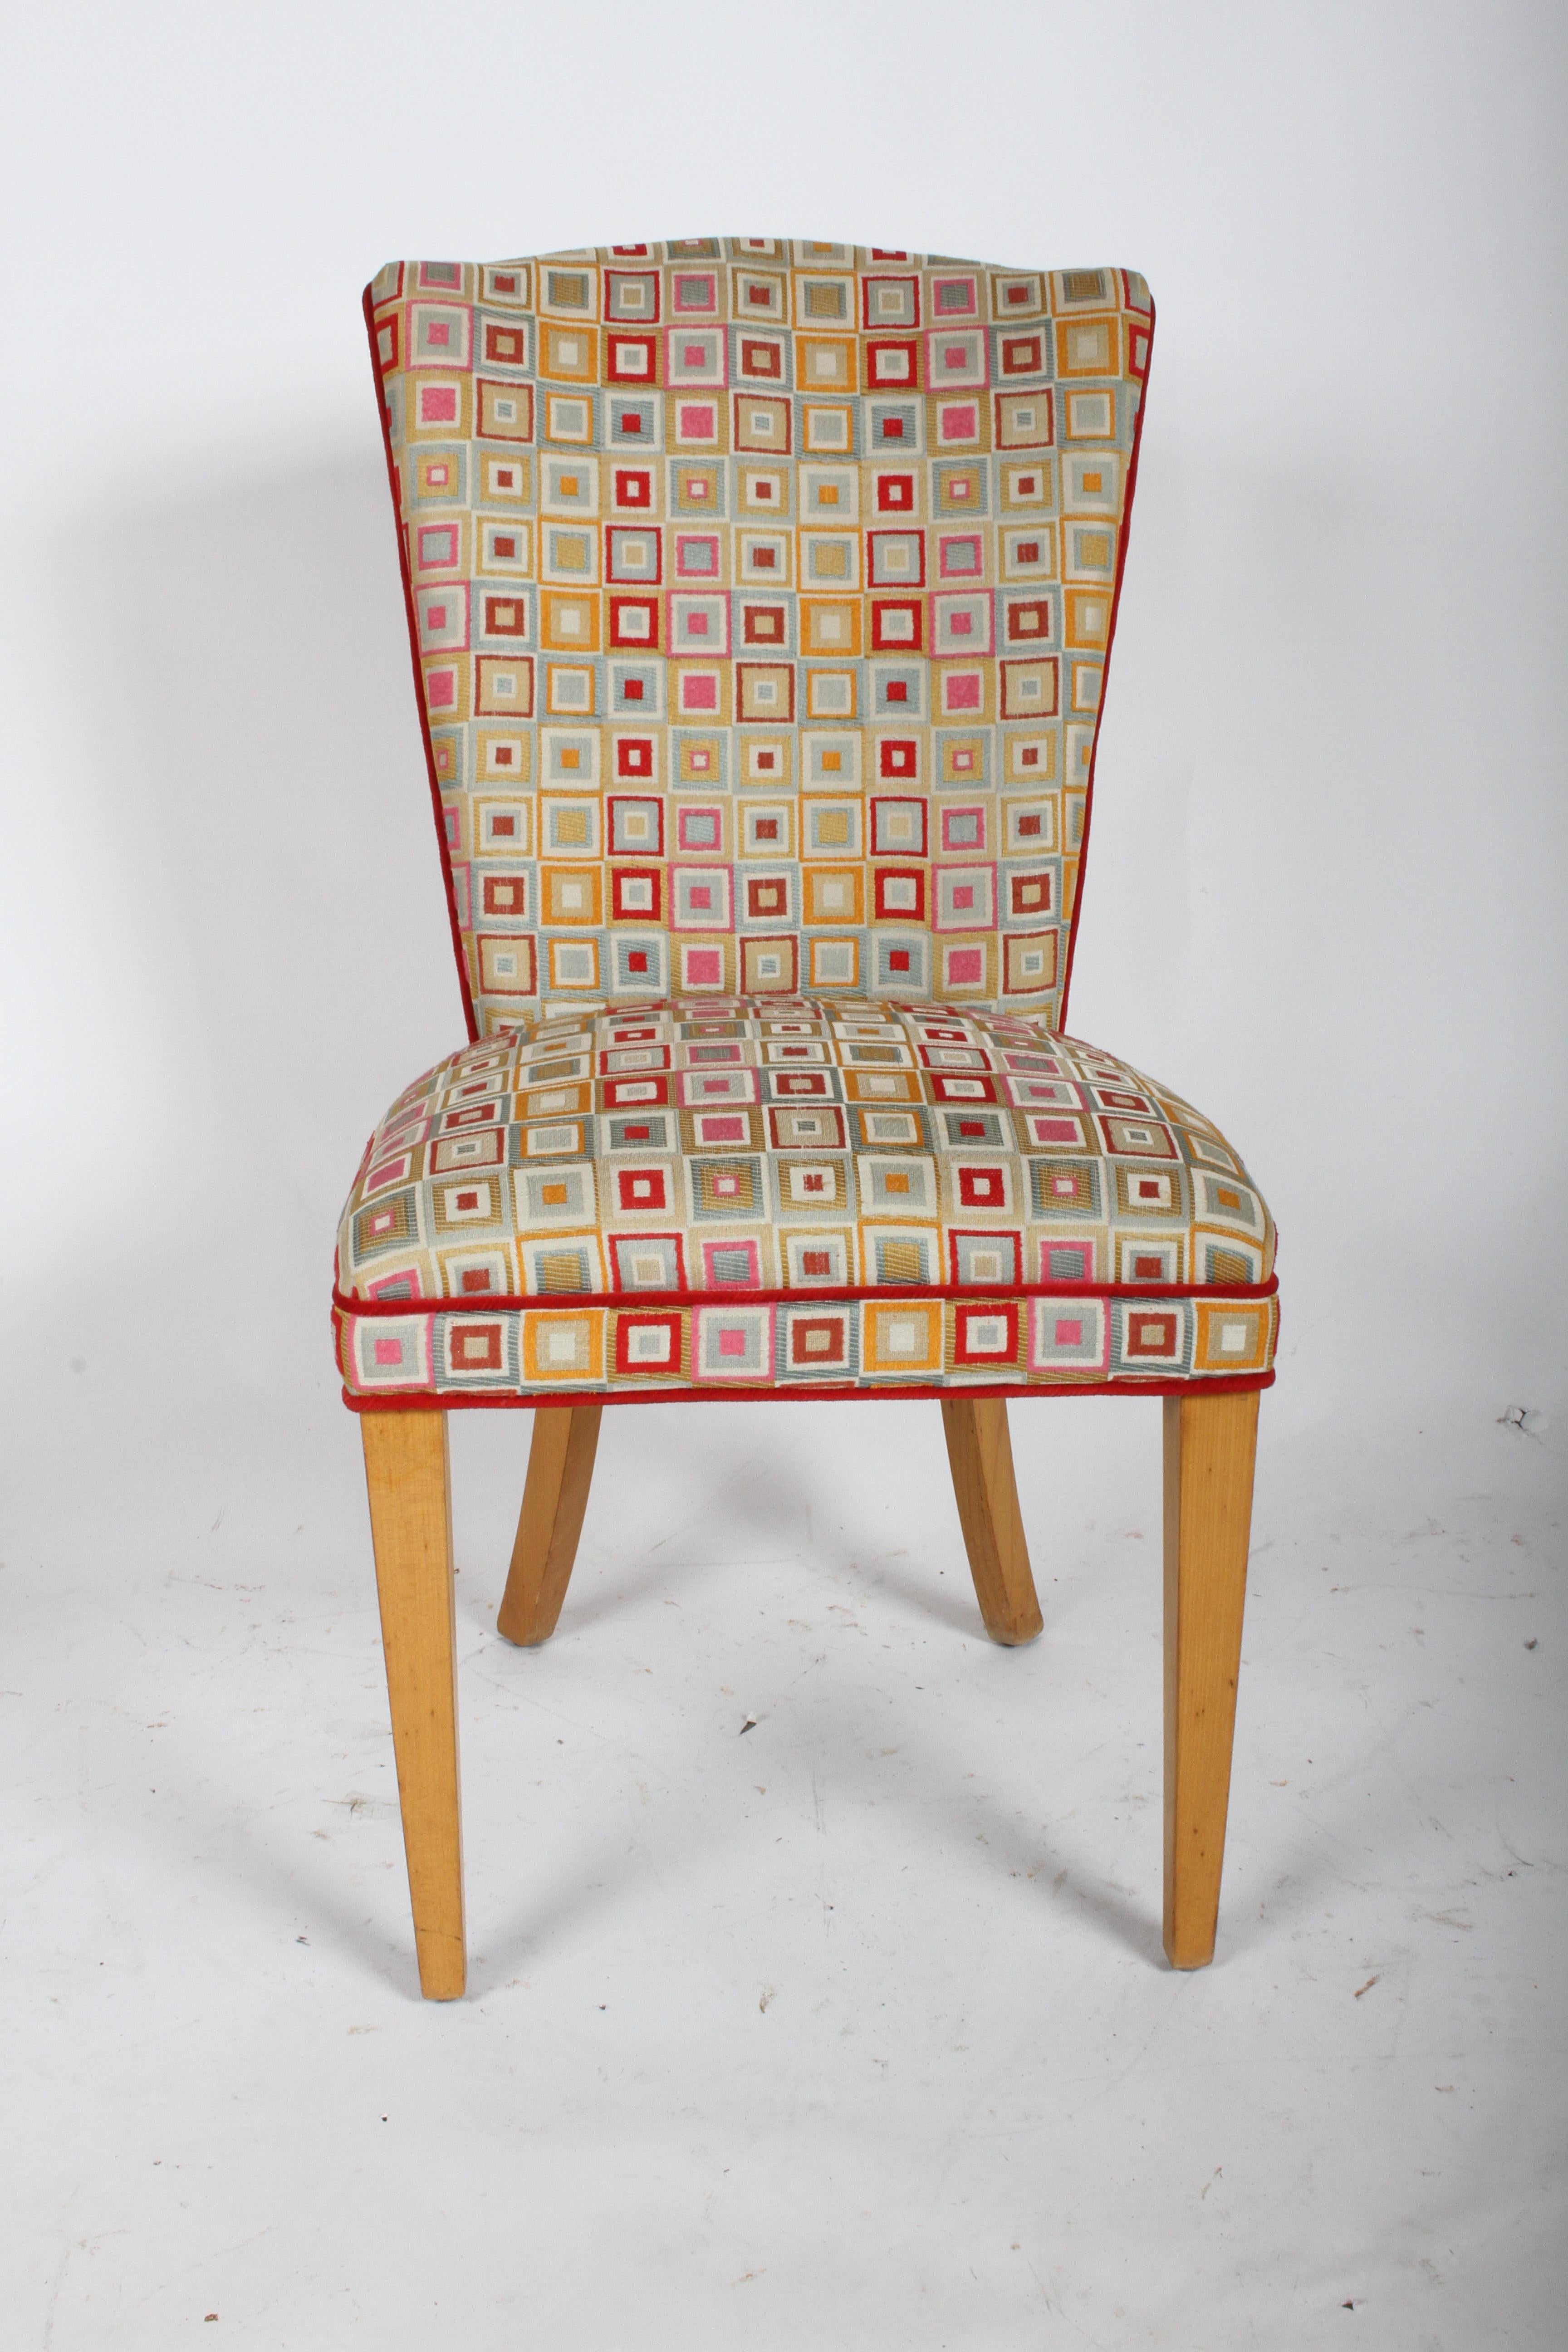 Pair of Hollywood Regency high back dining or occasional chairs with vintage Josef Albers style square geometric upholstery. All original wood finish, upholstery shows wear. Please note only one chair is show in photos. If perfection is sought, then